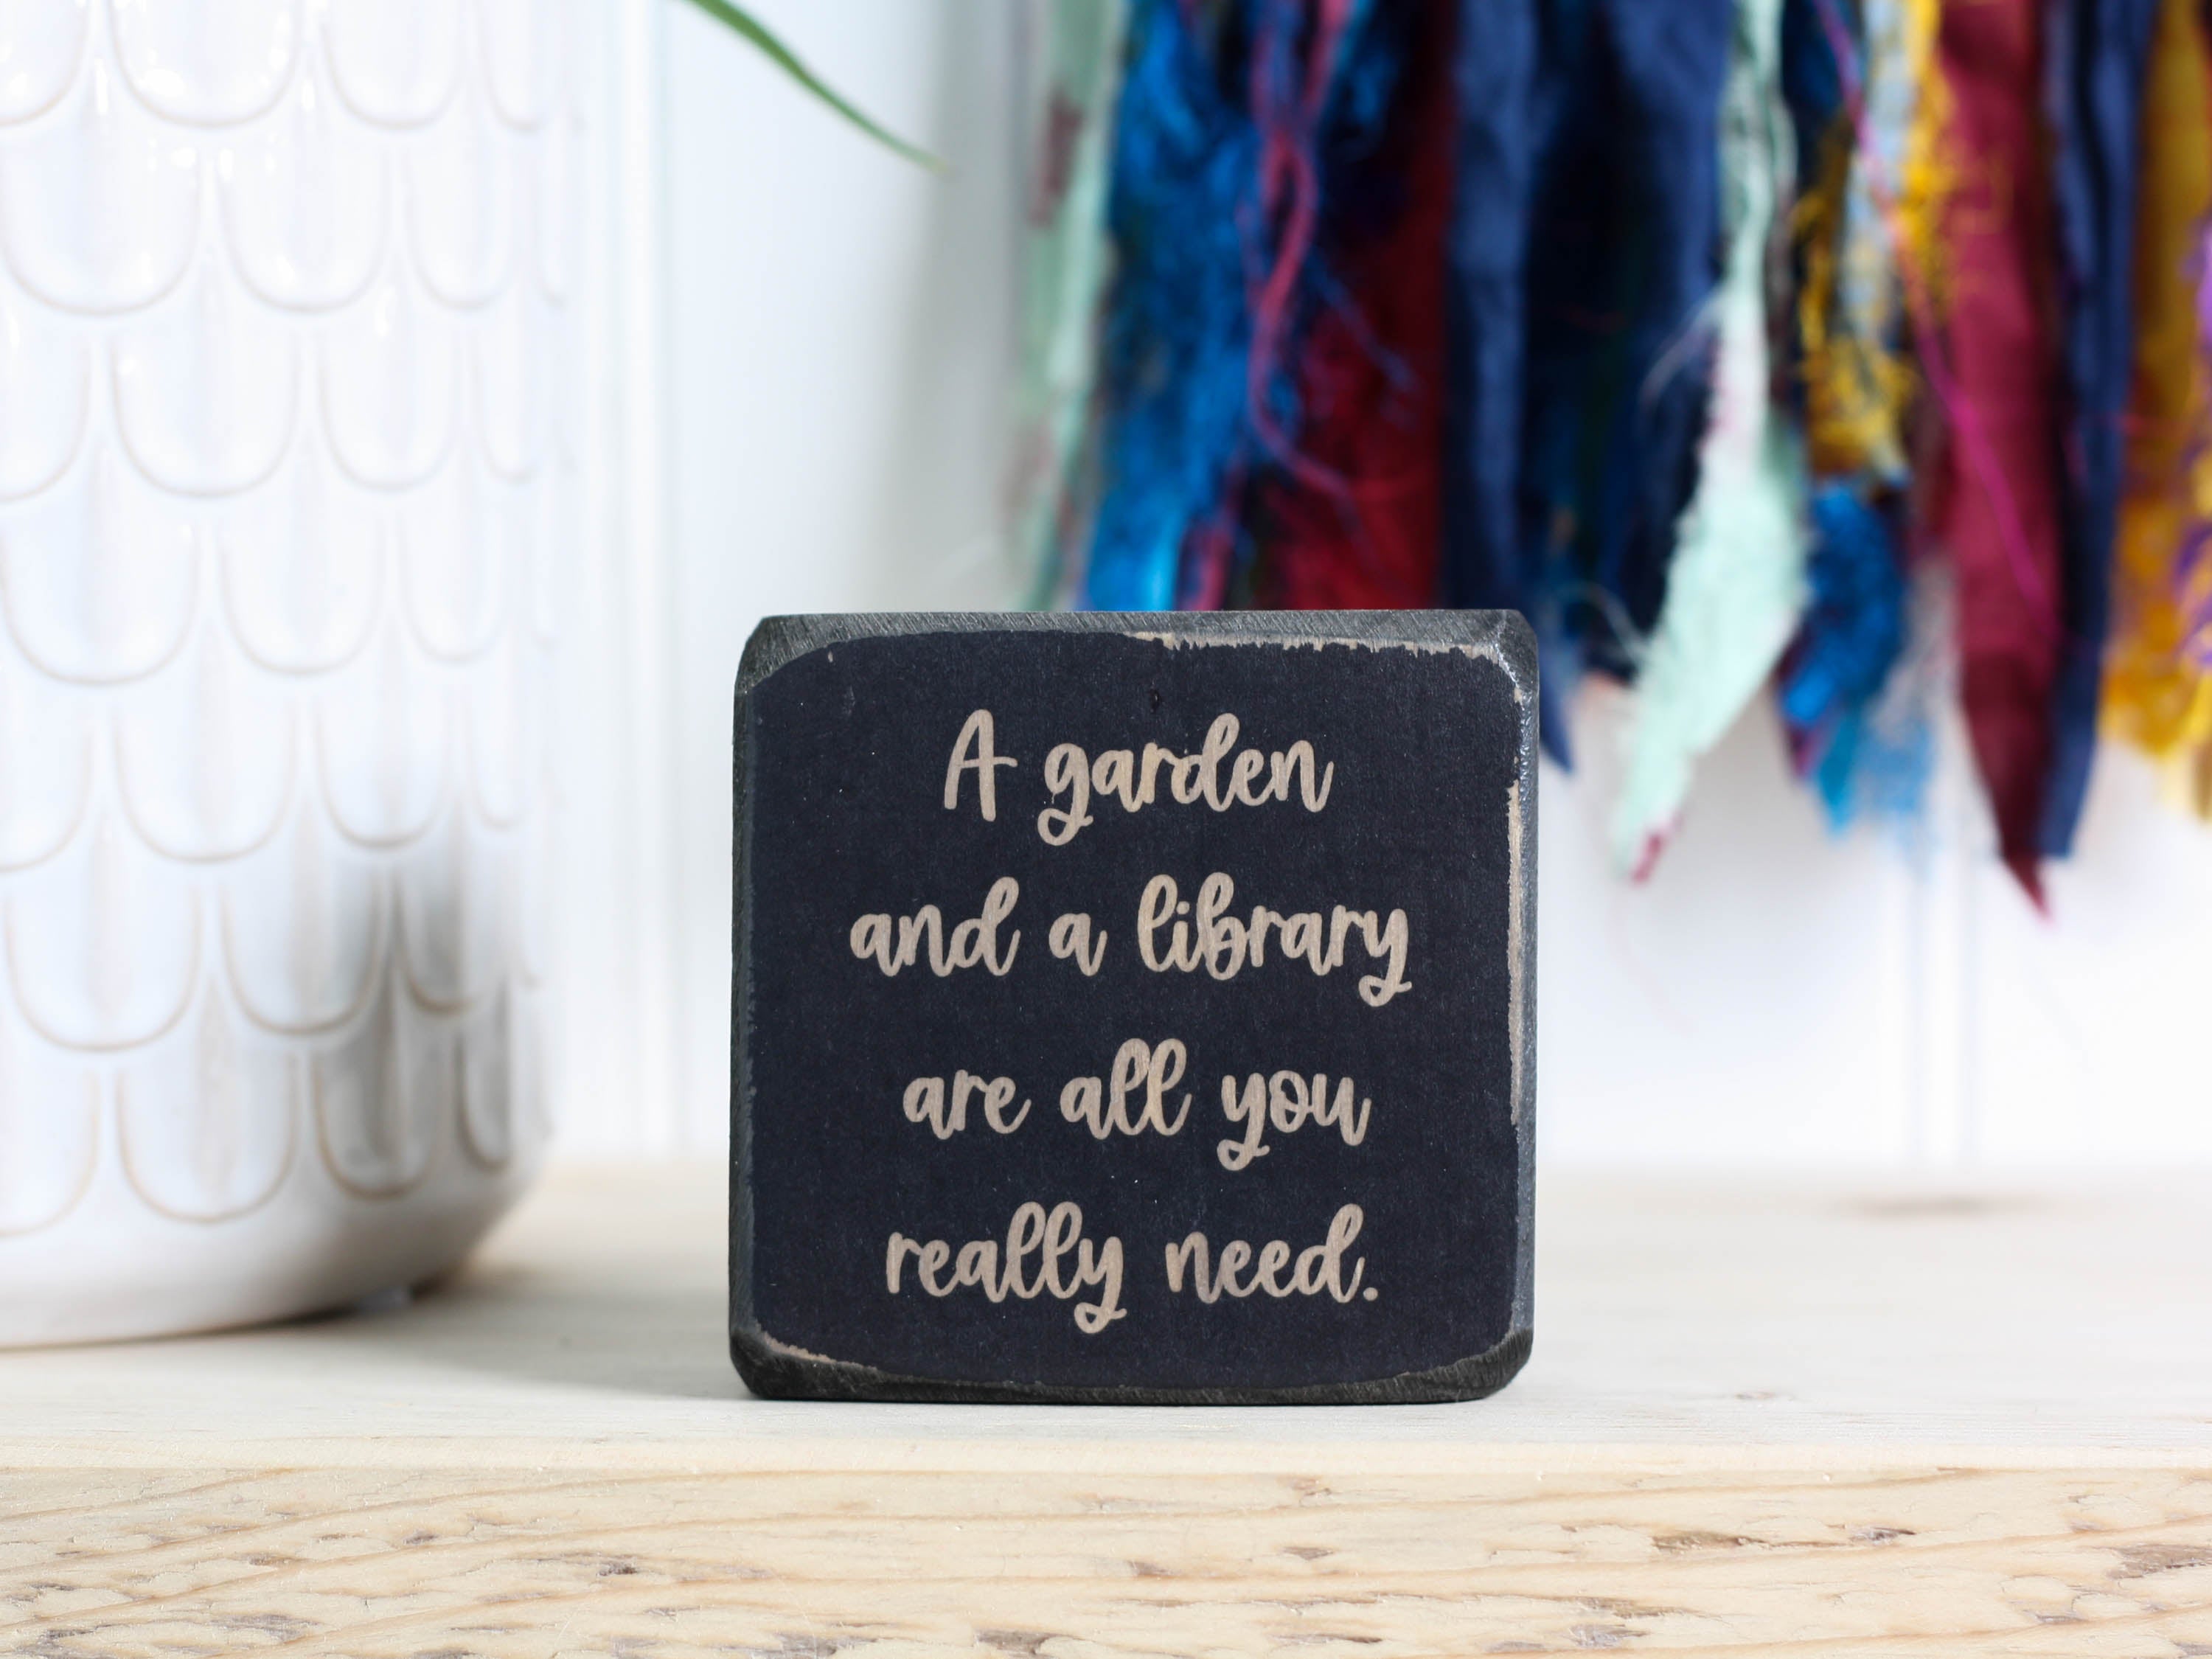 Small wood sign in distressed black with the saying "A garden and a library are all you really need."